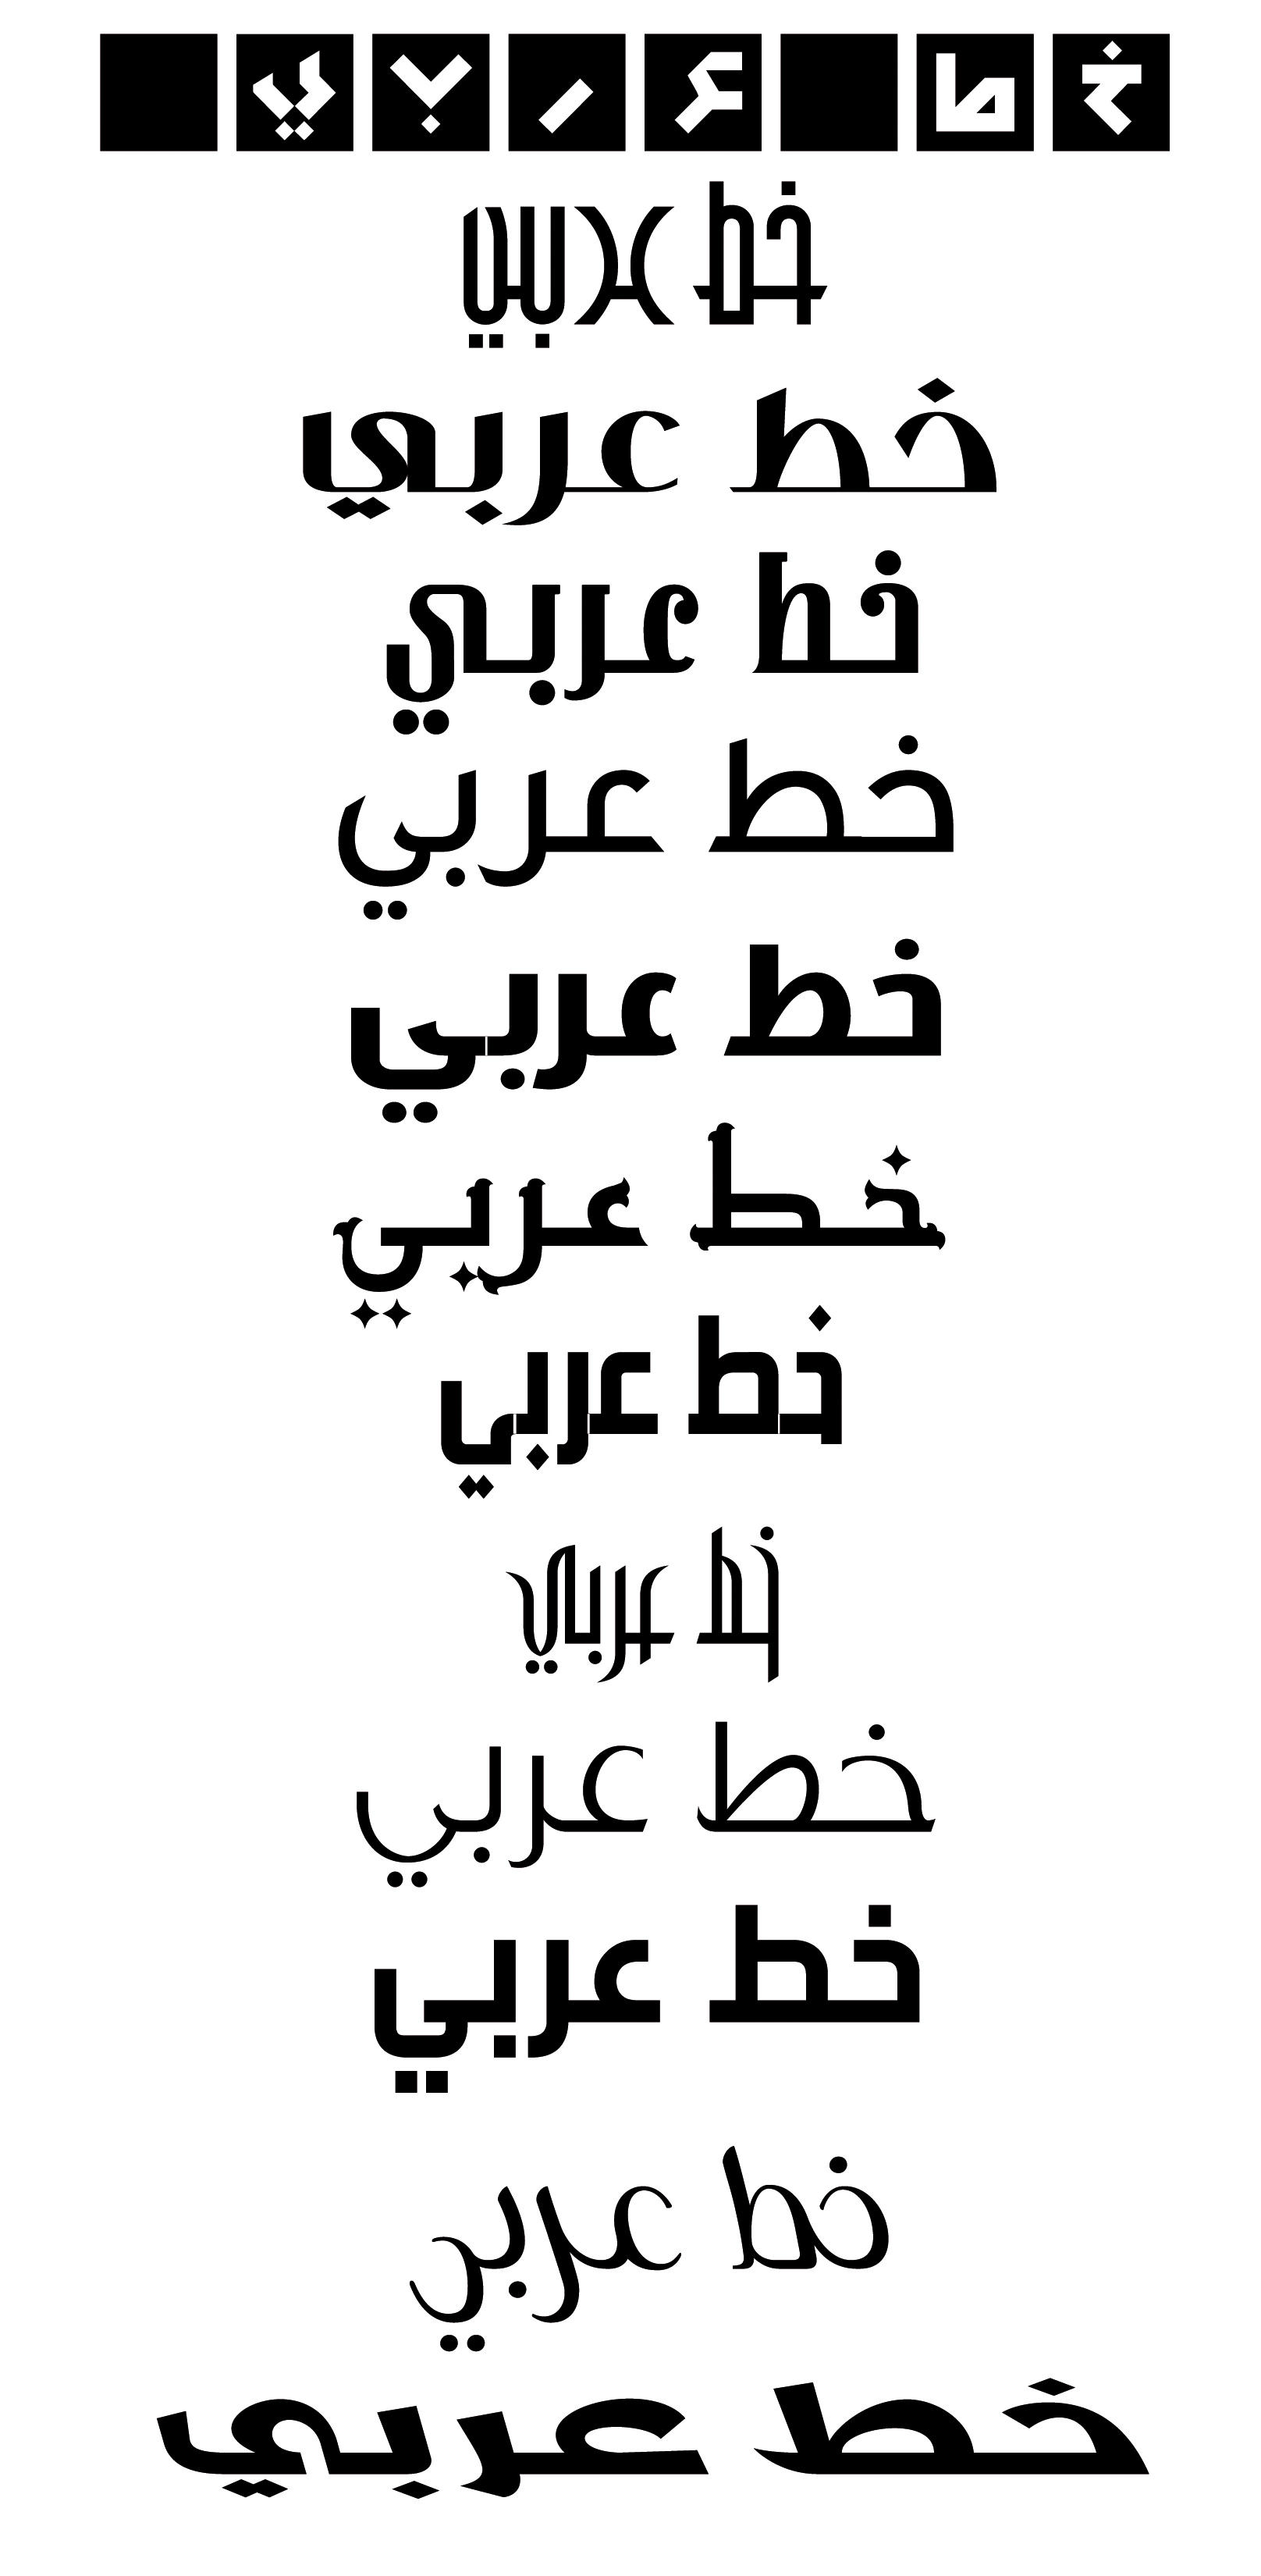 How To Add Arabic Fonts To Microsoft Word